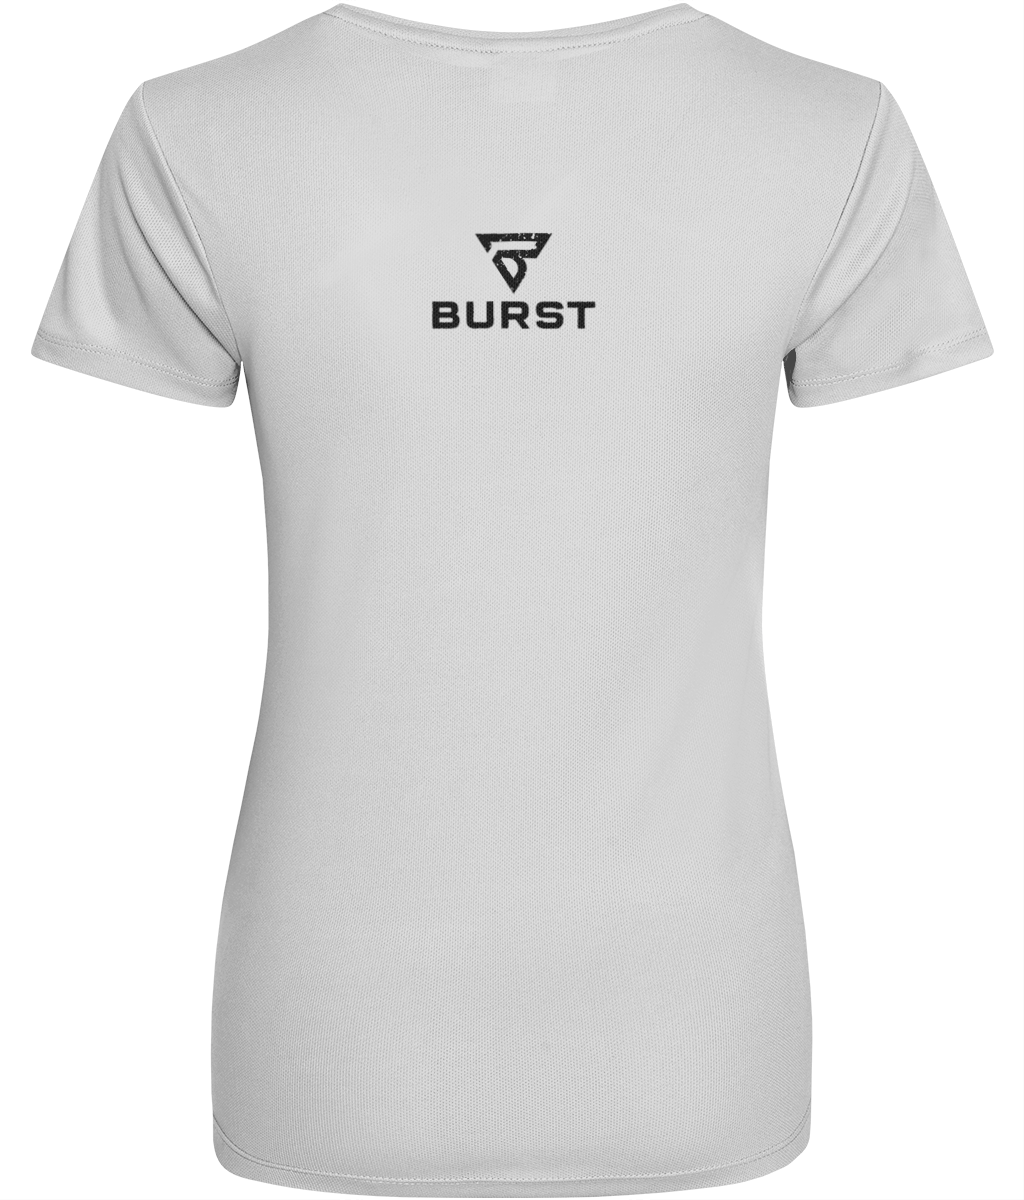 BURST Ladies OCEAN Active Recycled Dry-Fit Light Breathable Workout T Shirt (White)